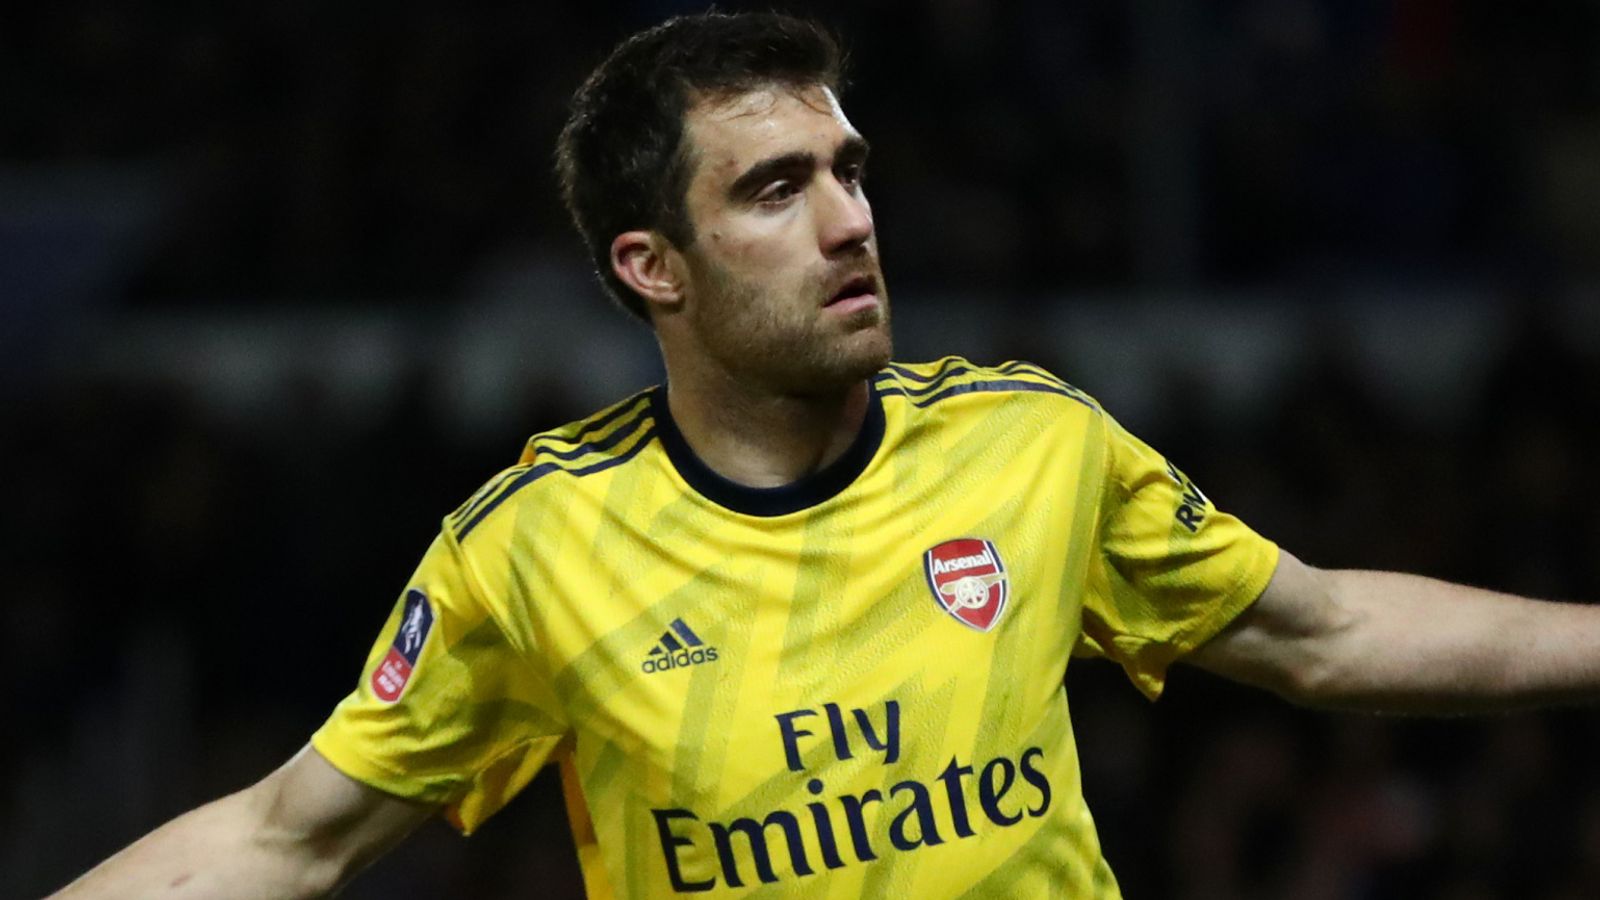 Arsenal's Sokratis Papastathopoulos will seek exit if he doesn't play enough games